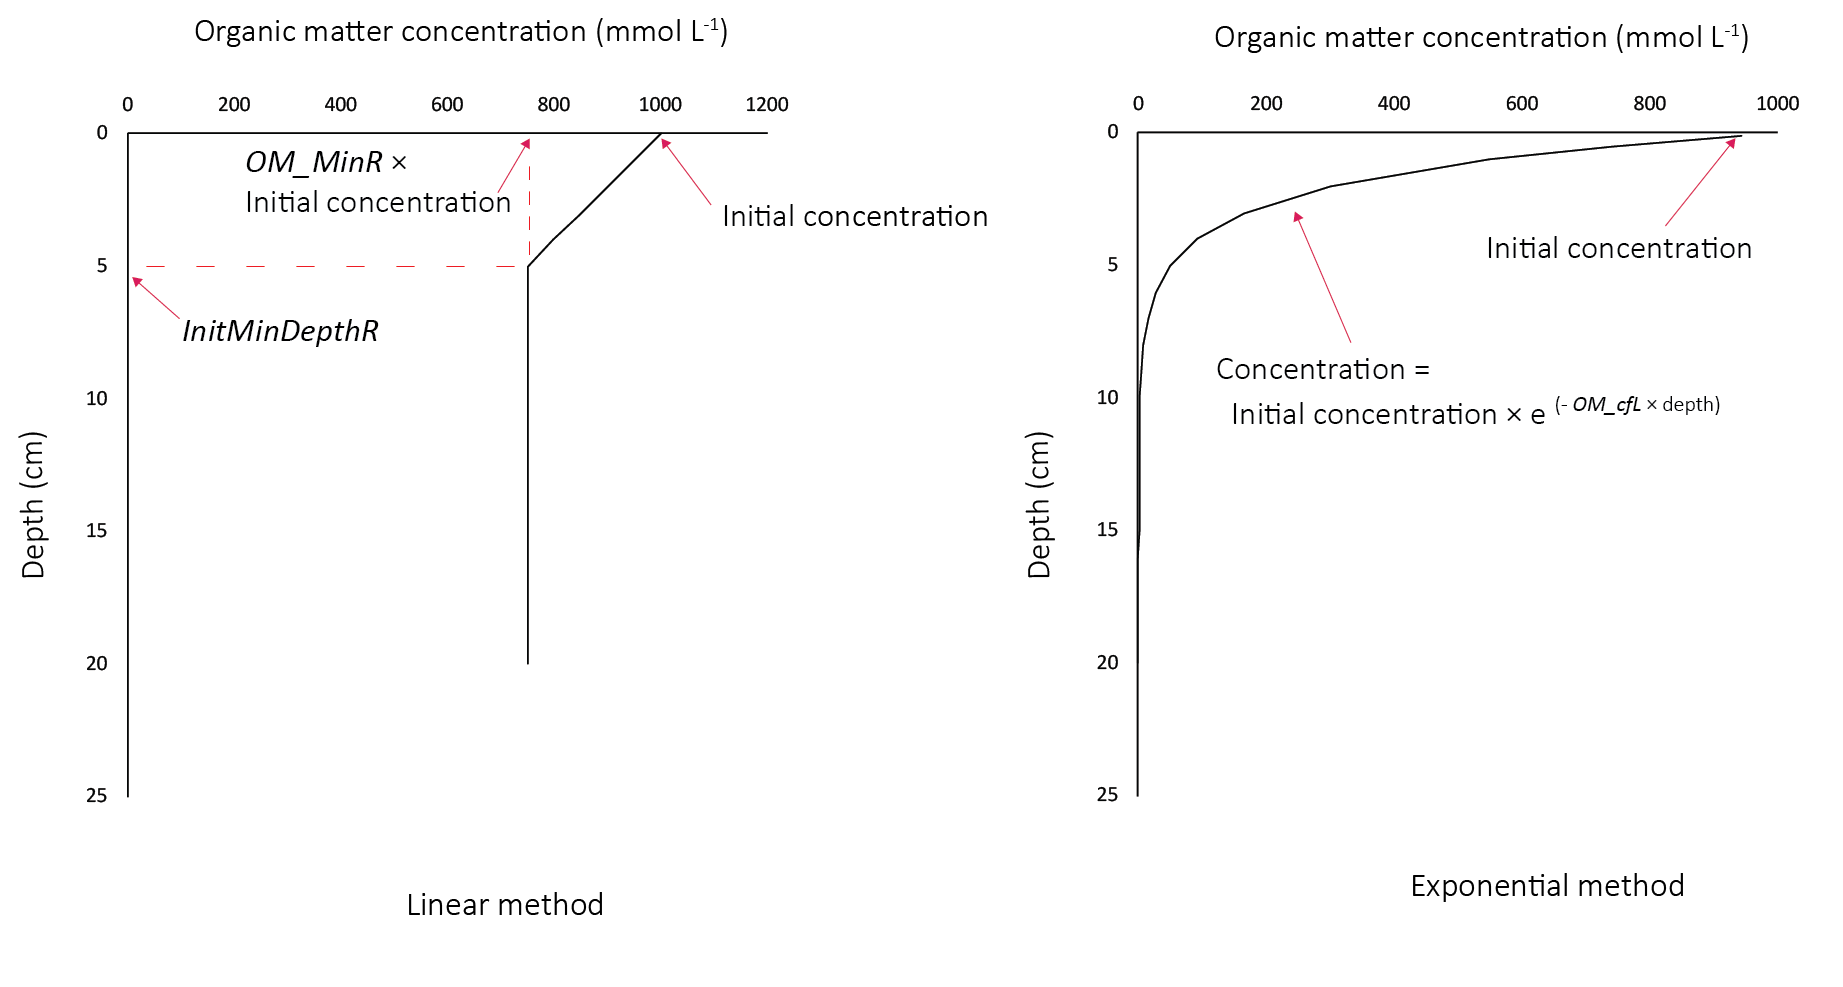 Organic matter initial profiles. Left - linear profiles for refractory species. Right - exponential profiles for labile species.